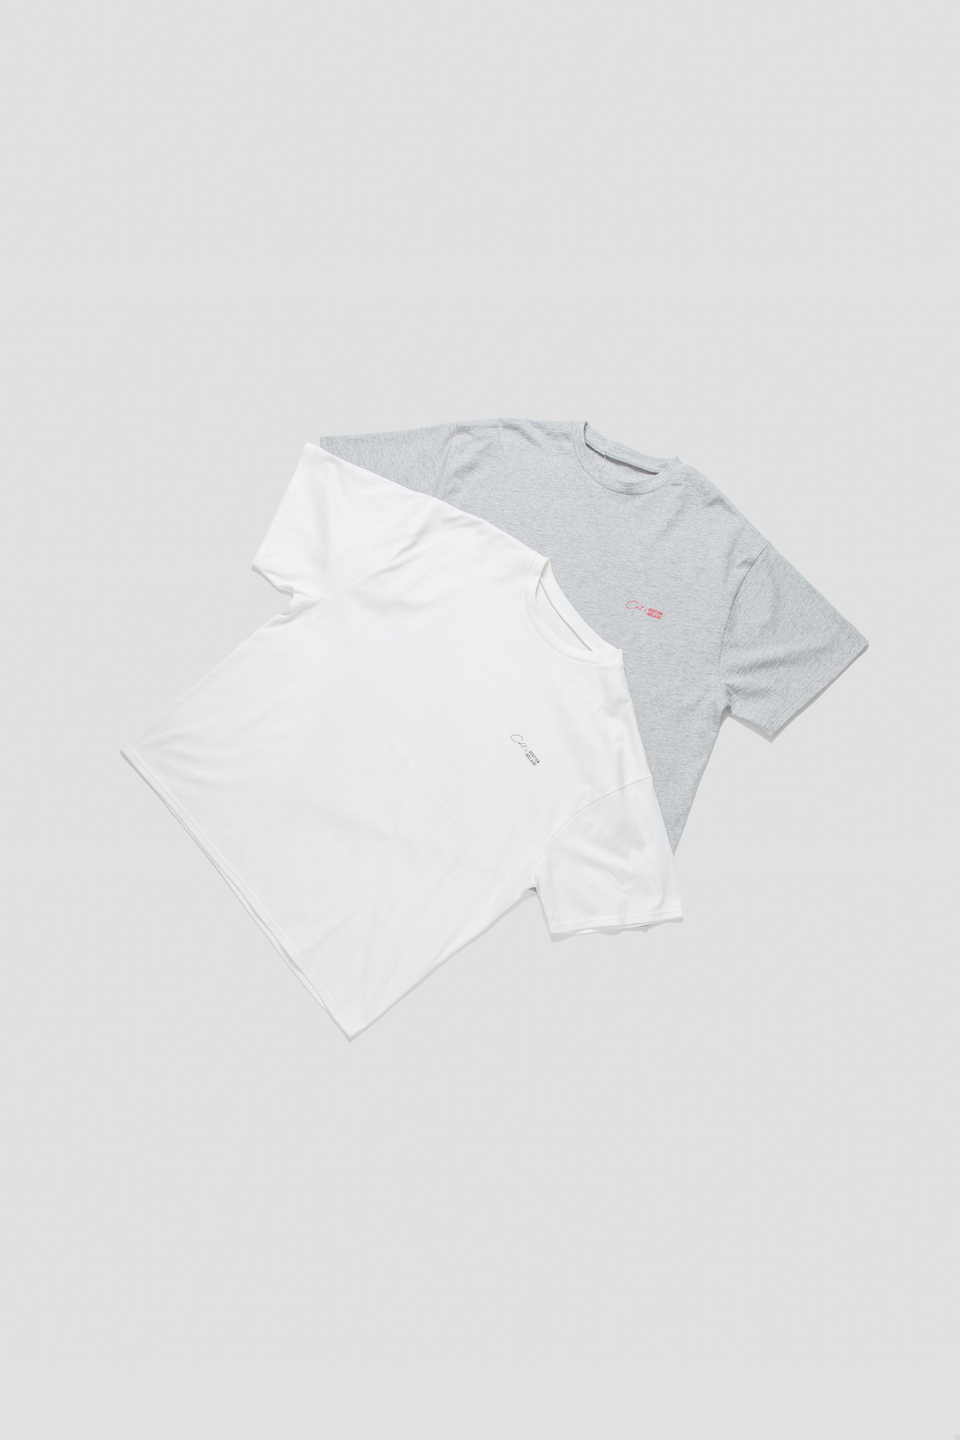 CDL ADELAIDE ADDITION 2pack Tシャツ Lサイズ